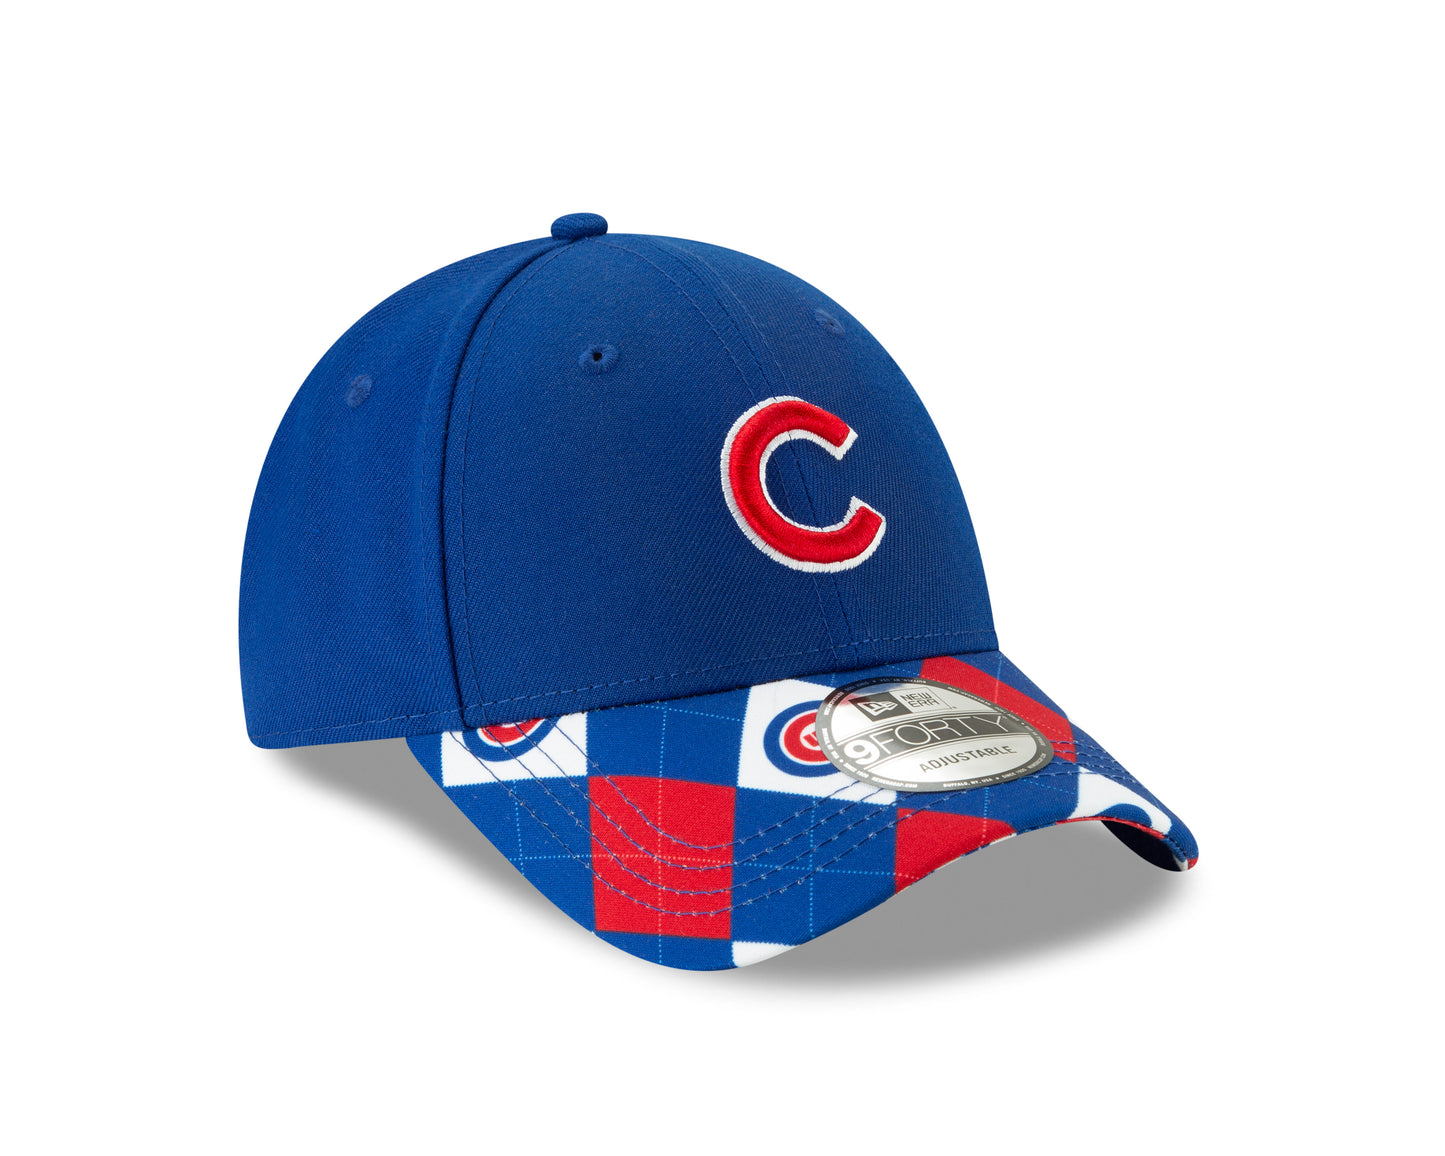 Loudmouth Golf Chicago Cubs 9FORTY Adjustable Hat By New Era